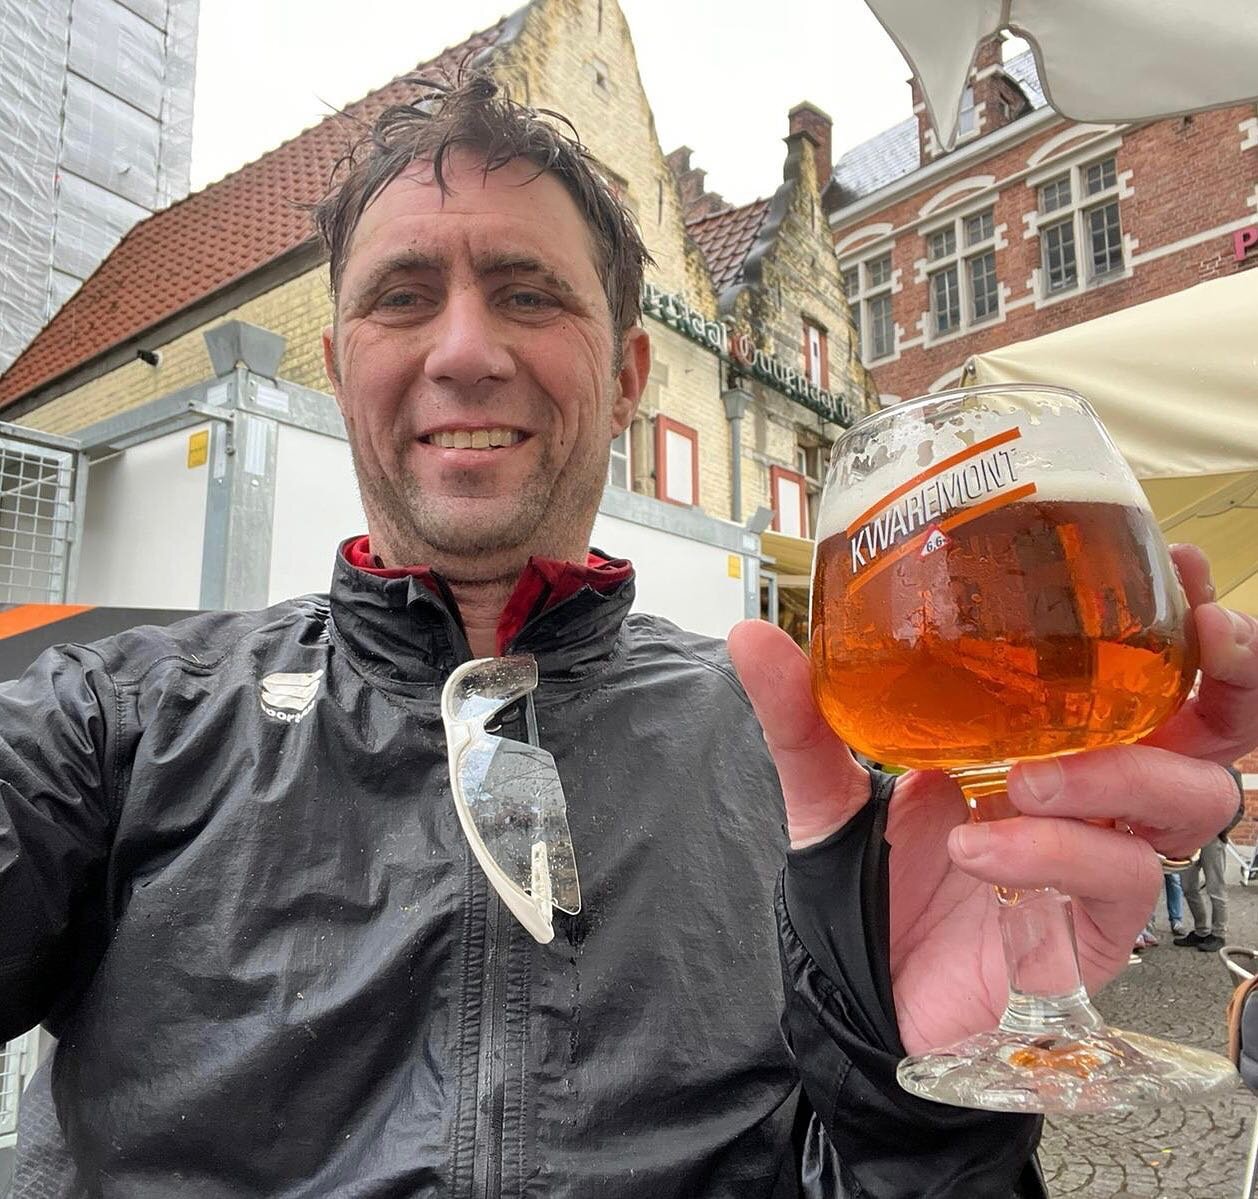 Big congratulations to BCC member Lee for completing the Tour of Flanders sportive, 240kms #tourofflanders #cobbles #deronde